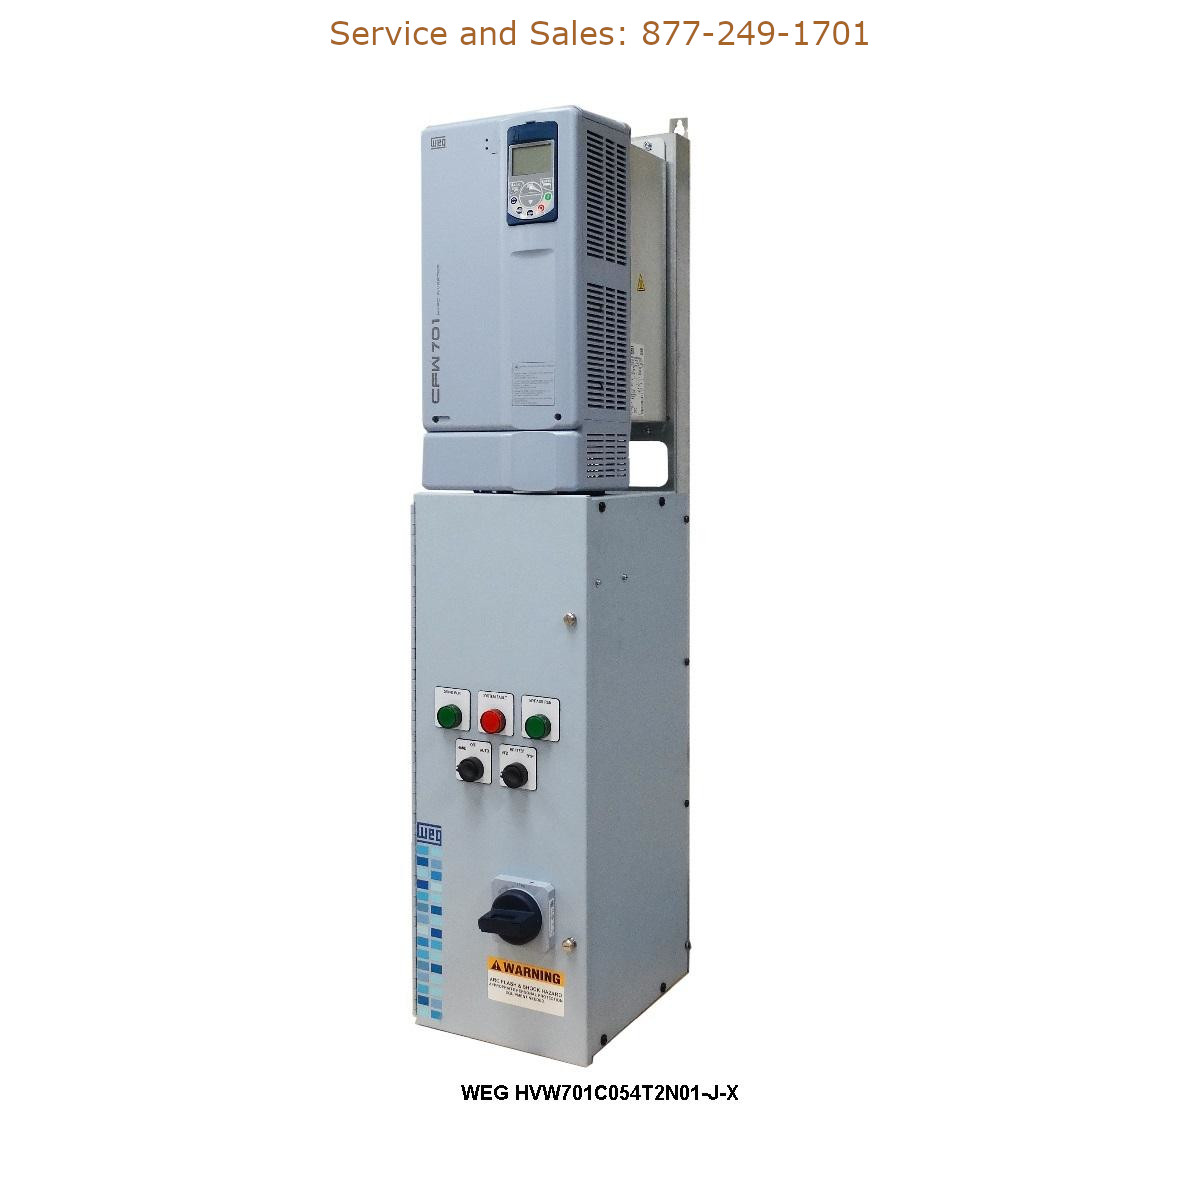 WEG HVW701C054T2N01-J-X WEG Model Number HVW701C054T2N01-J-X WEG Drives, Variable Speed Drives Repair Service, Troubleshooting, Replacement Parts https://gesrepair.com/wp-content/uploads/2022/WEG/WEG_HVW701C054T2N01-J-X_Drives_Variable_Speed_Drives.jpg